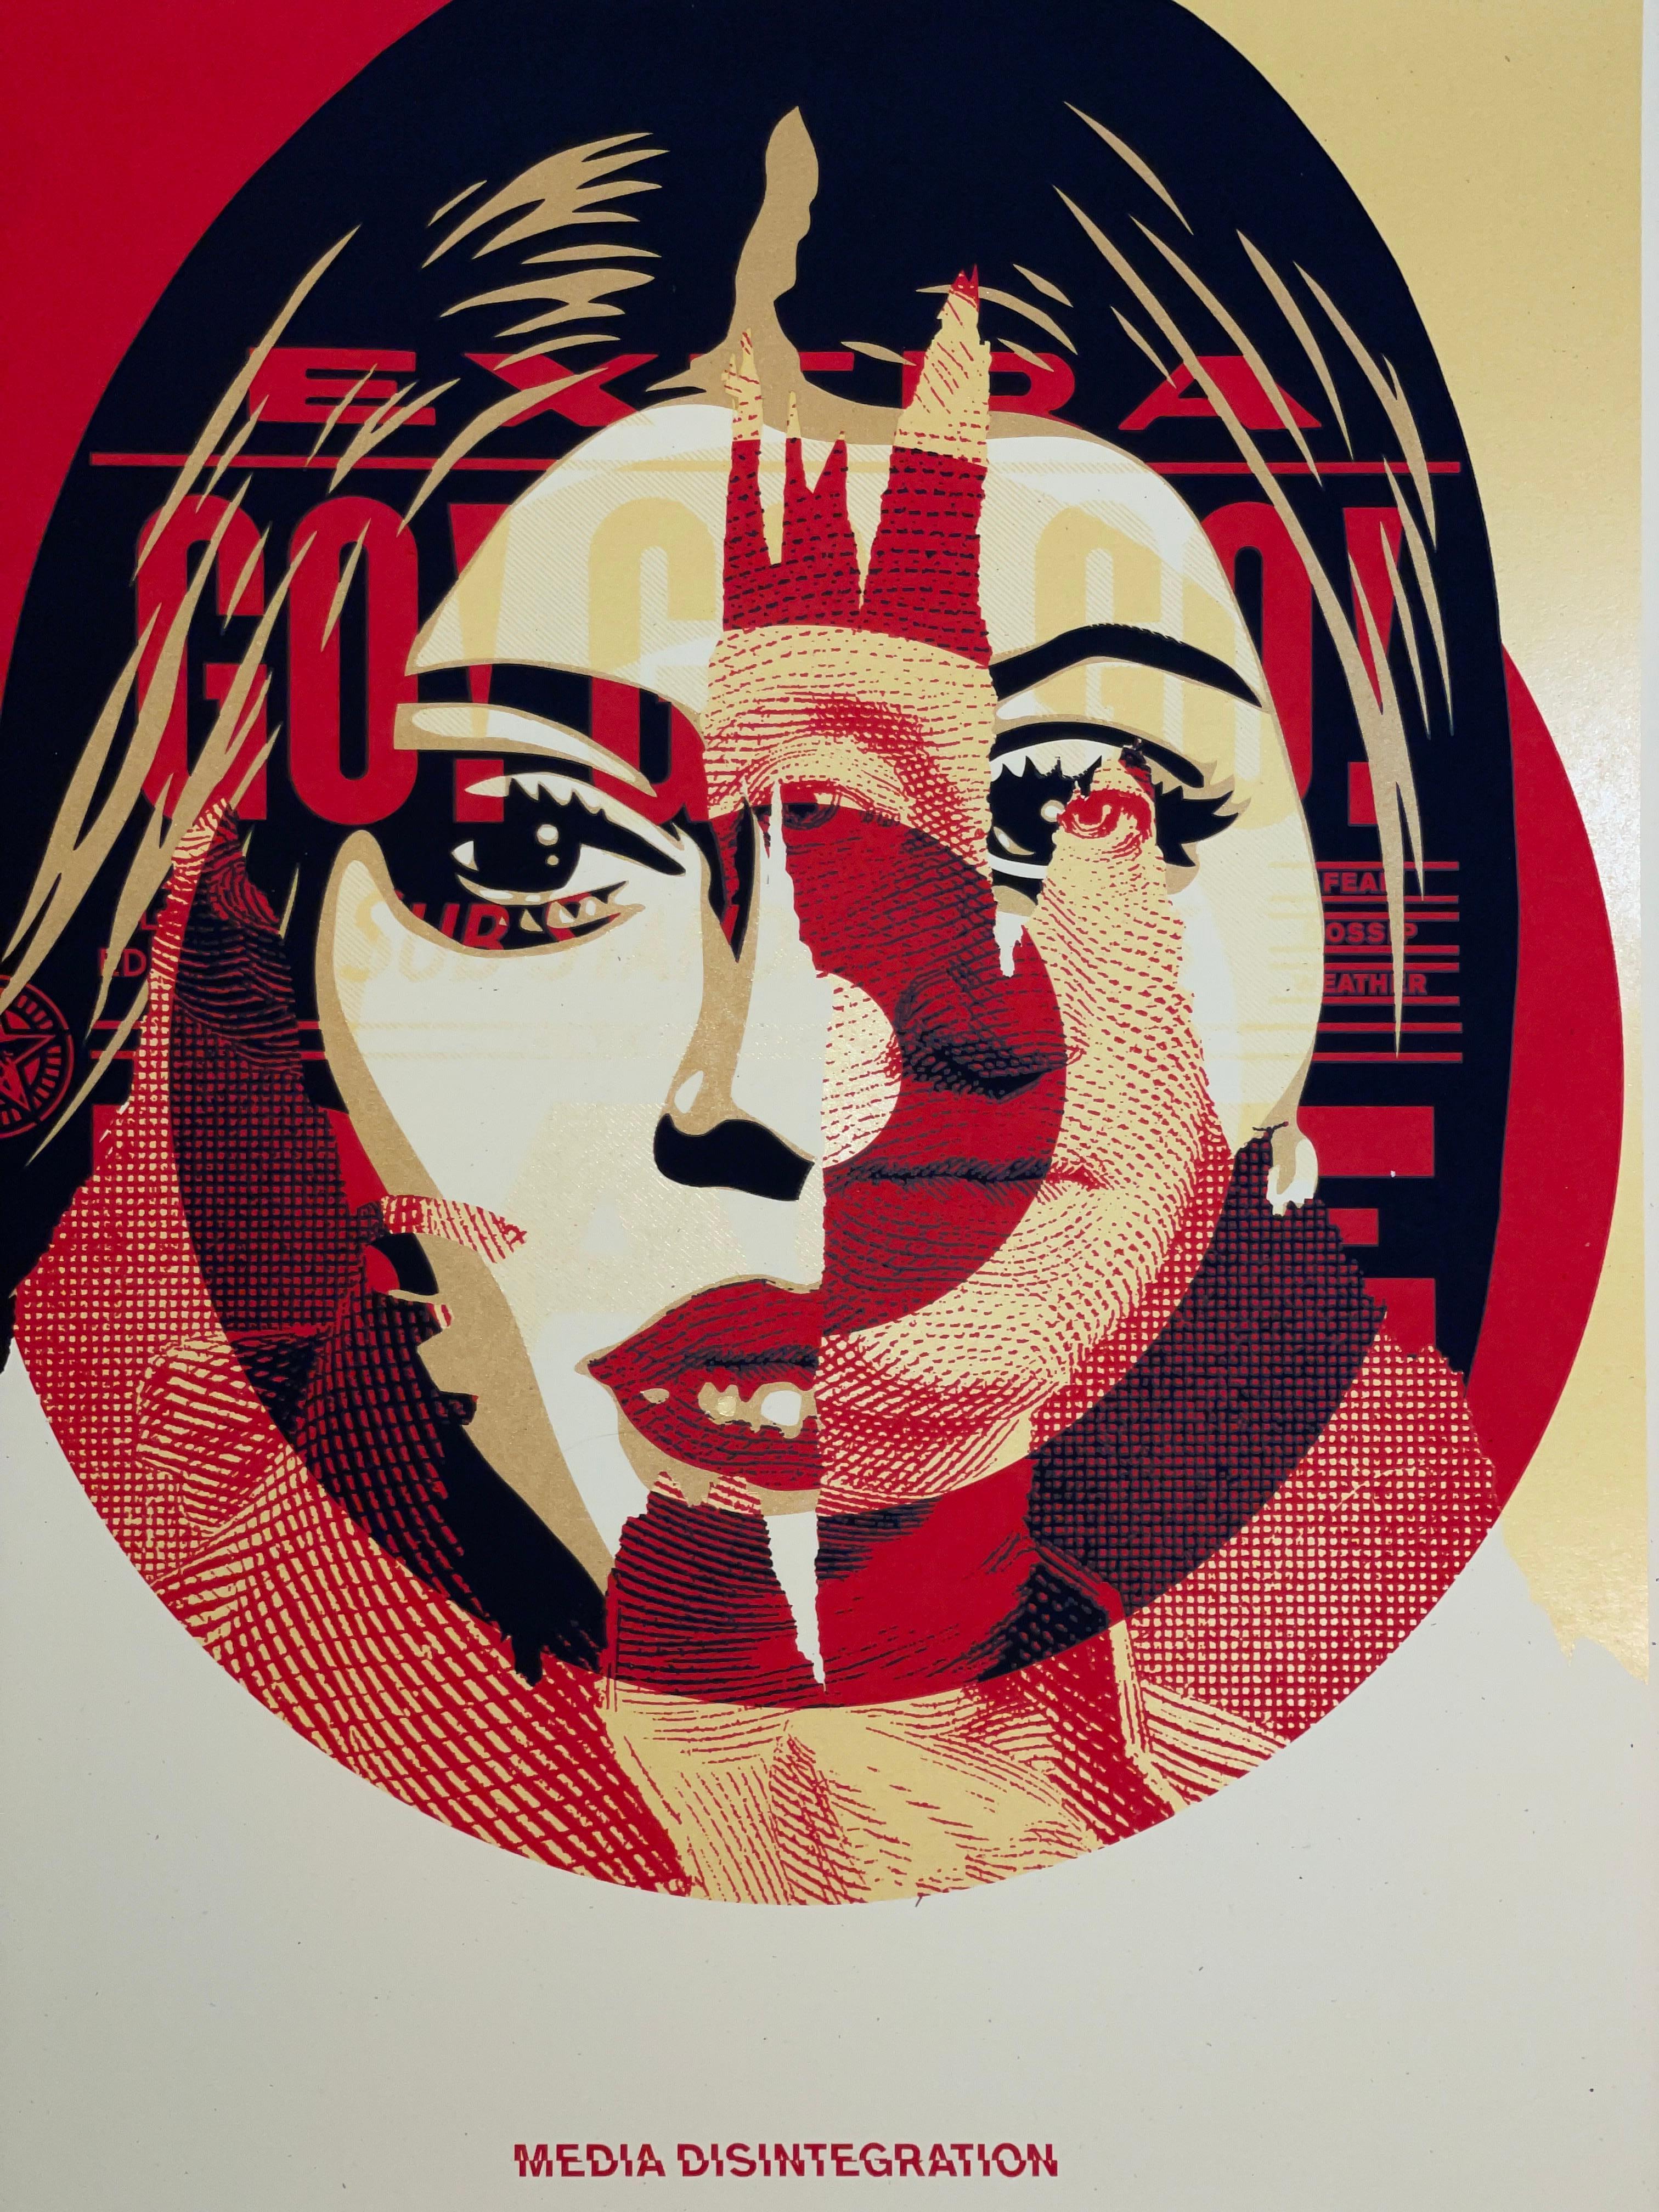 Edition Details:
Year:	2016
Class:	Art Print
Status:	Official
Released:	10/04/16
Run:	450
Technique:	Screen Print
Paper:	Cream Speckle Tone with Gold Leaf
Size:	18 X 24
Markings:	Signed & Numbered in pencil by the Artist Shepard Fairey.

Numbered